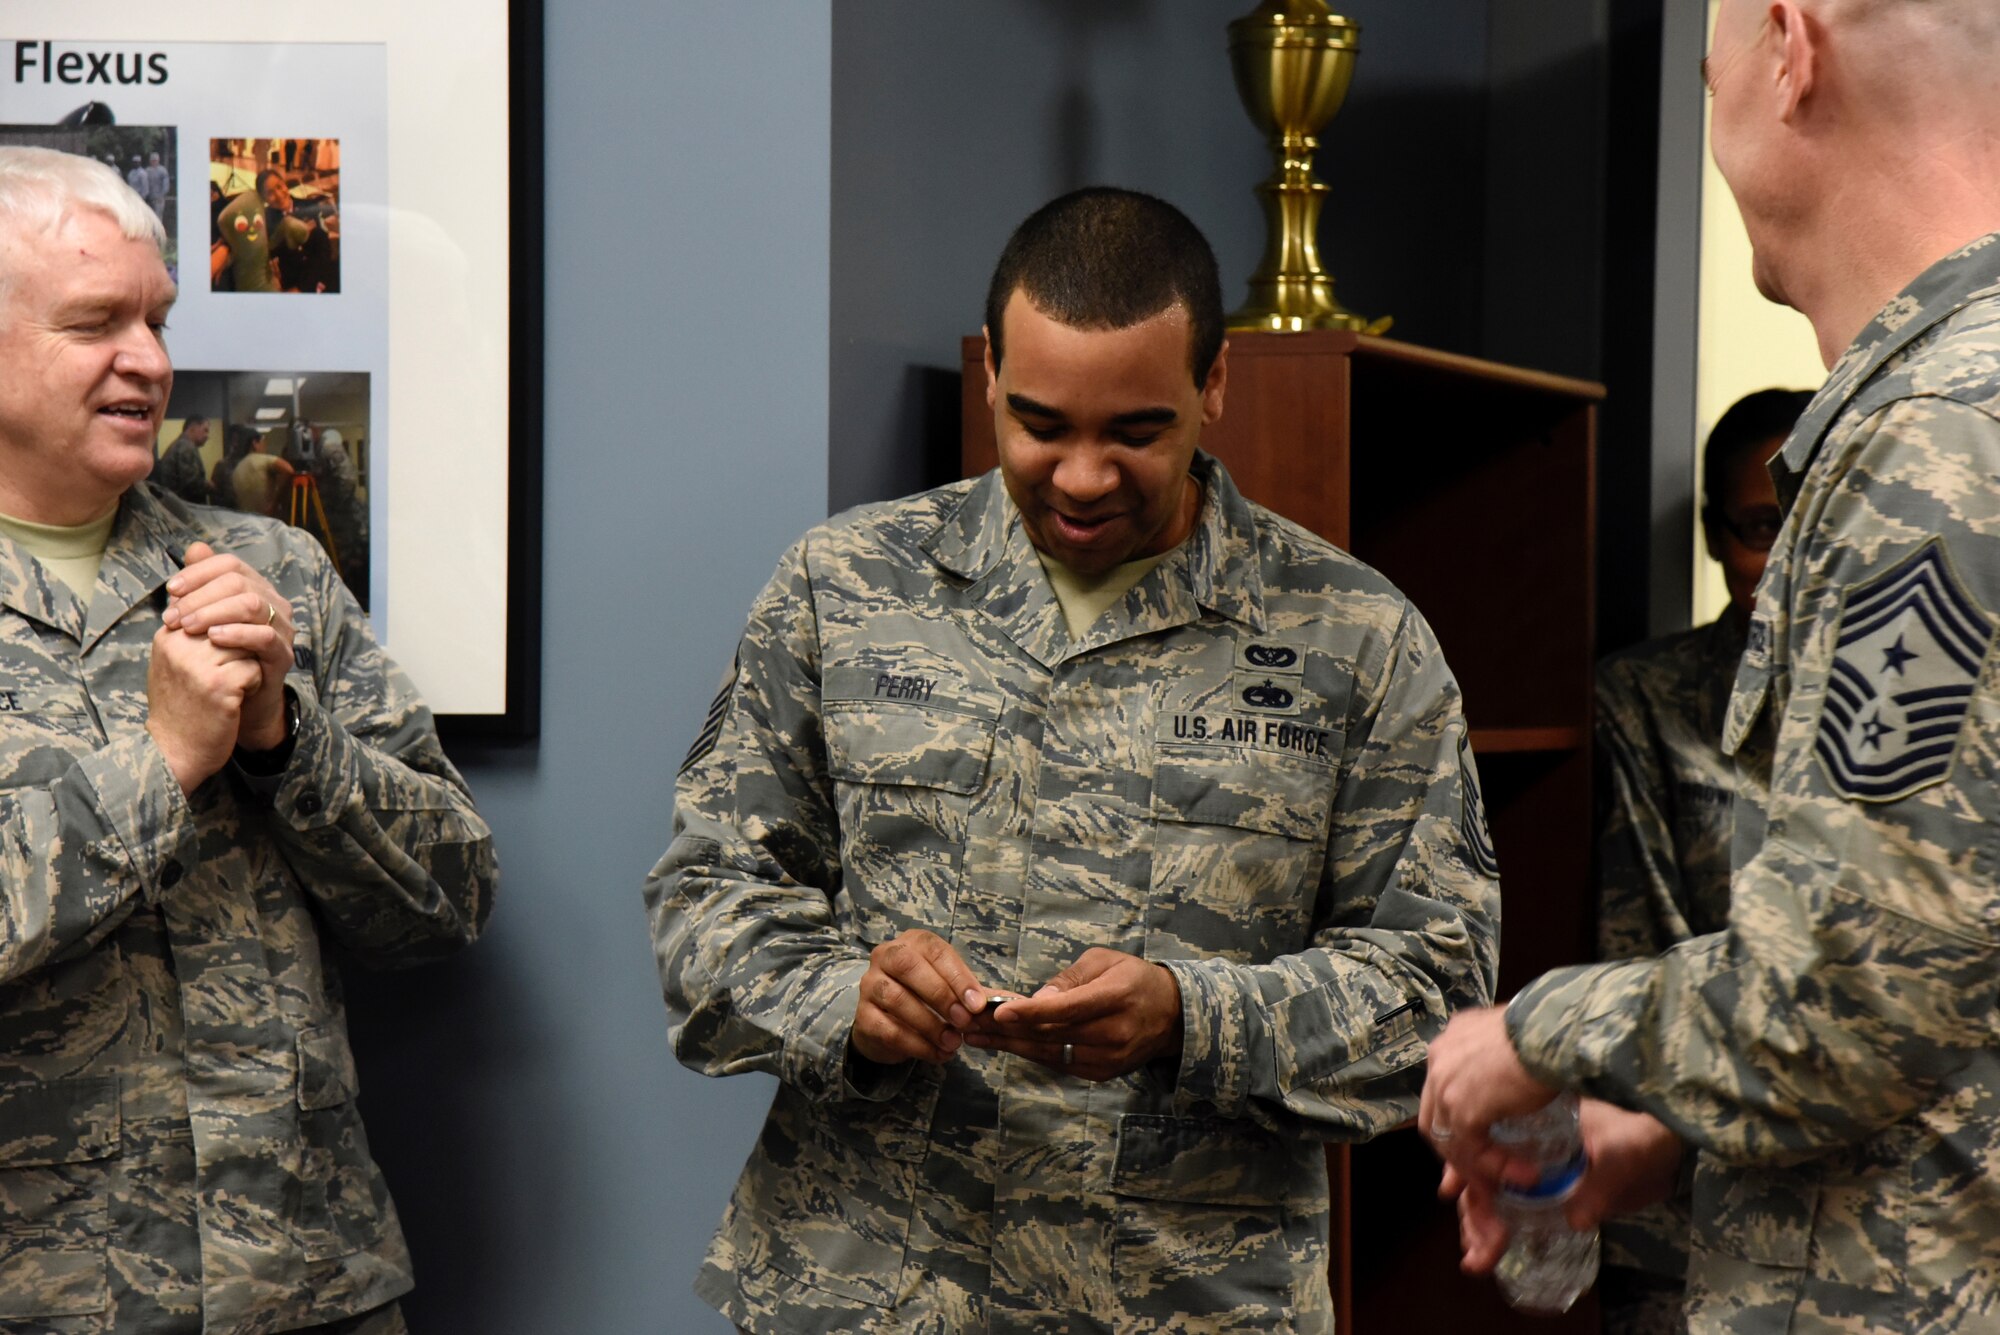 Master Sgt. Dallas Perry,  235th Civil Engineering Flight program analyst, observes the coin he just received from Command Chief Master Sgt. Ronald C. Anderson Jr., Command Chief Master Sergeant of the Air National Guard, and Lt. Gen. L. Scott Rice, the Director of the Air National Guard, February 10, 2018 at Warfield Air National Guard Base, Middle River, Md.